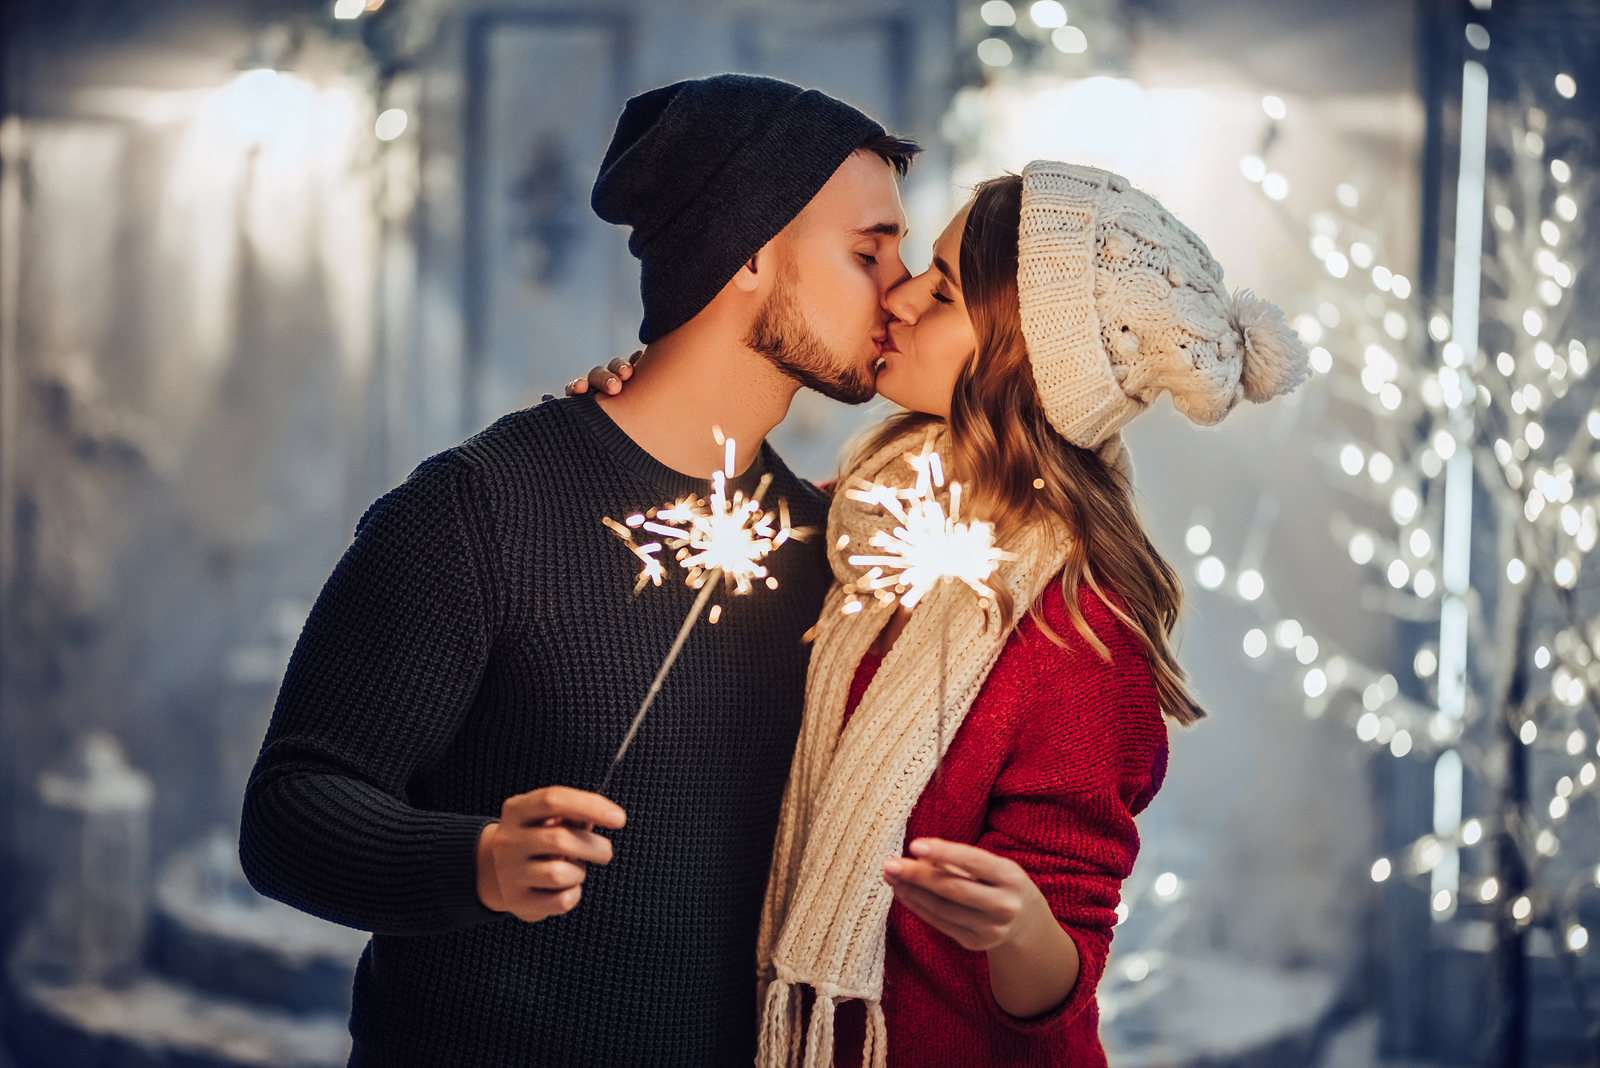 Christmas traditions for couples - couple outside in winter clothes kissing and holding lit sparklers